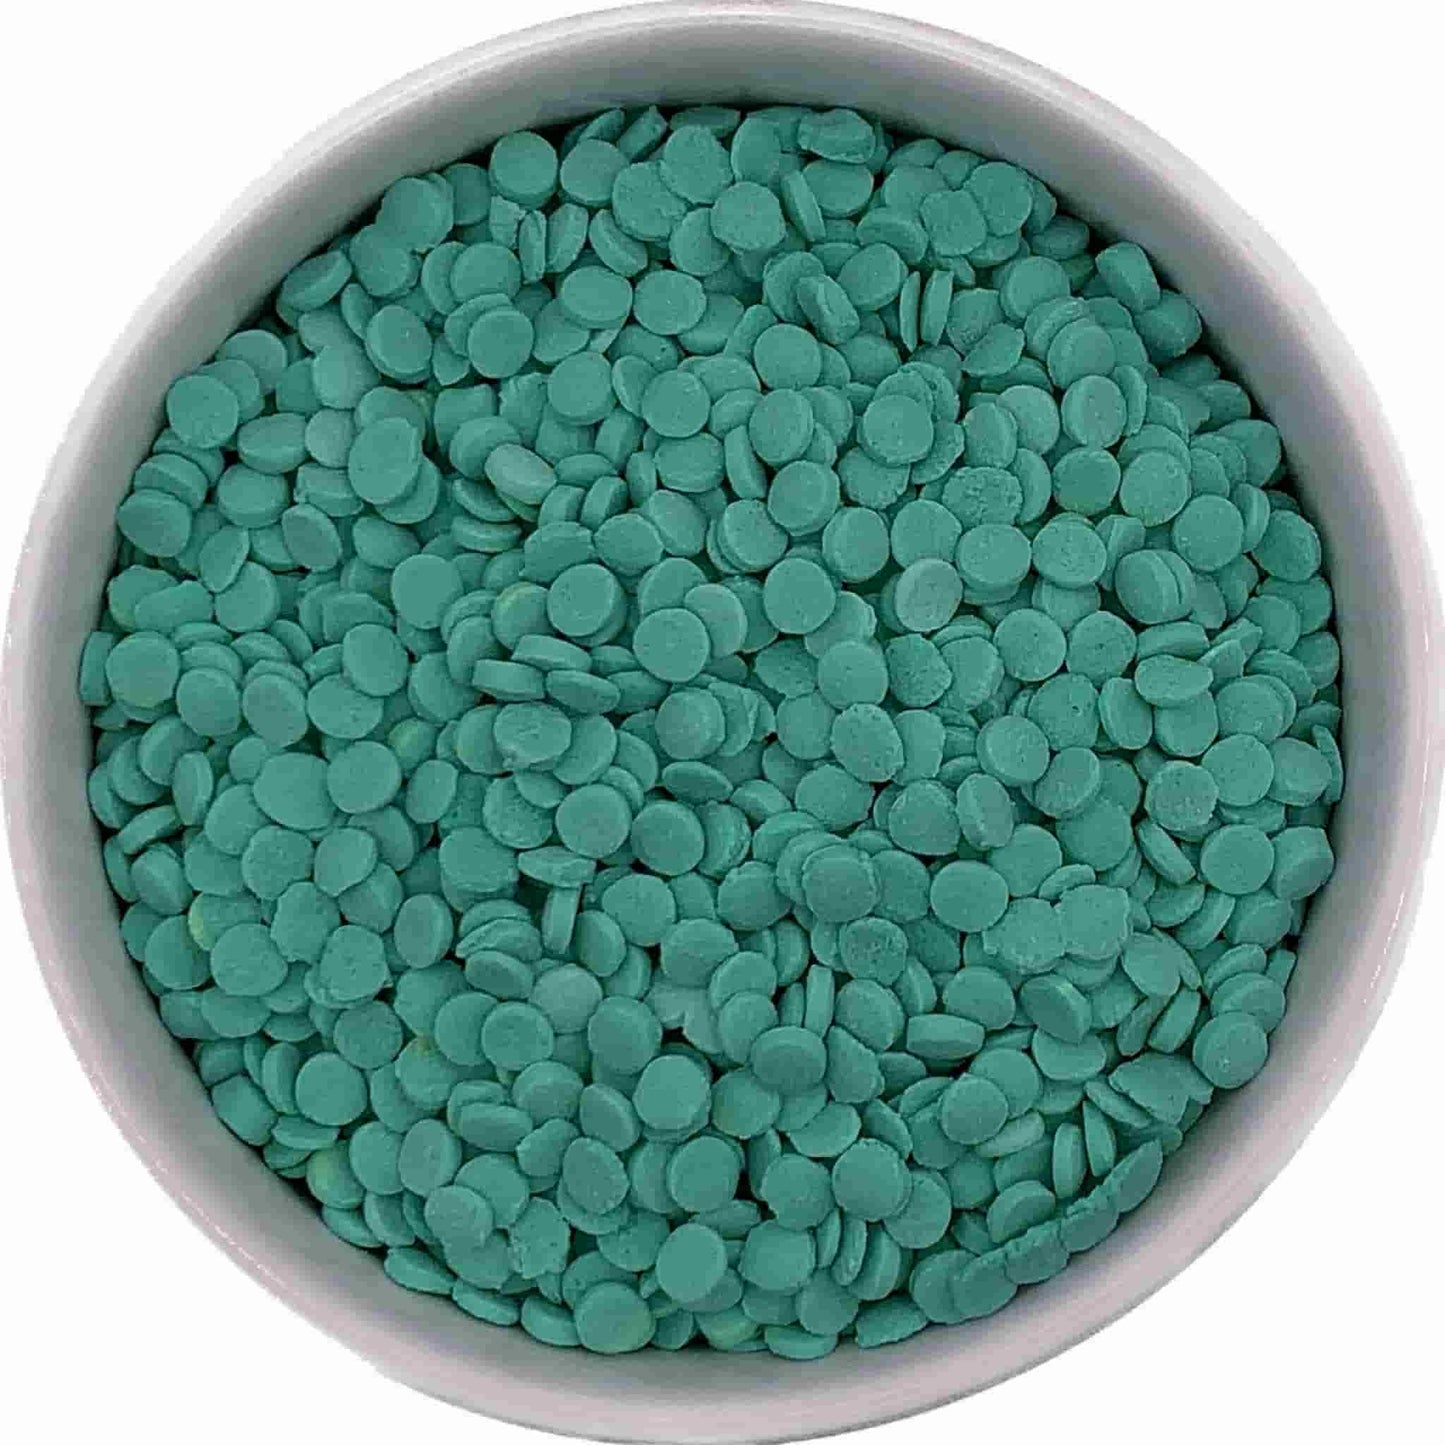 Teal and mint green confetti sprinkles for a refreshing color pop on cakes, cookies, and confections.